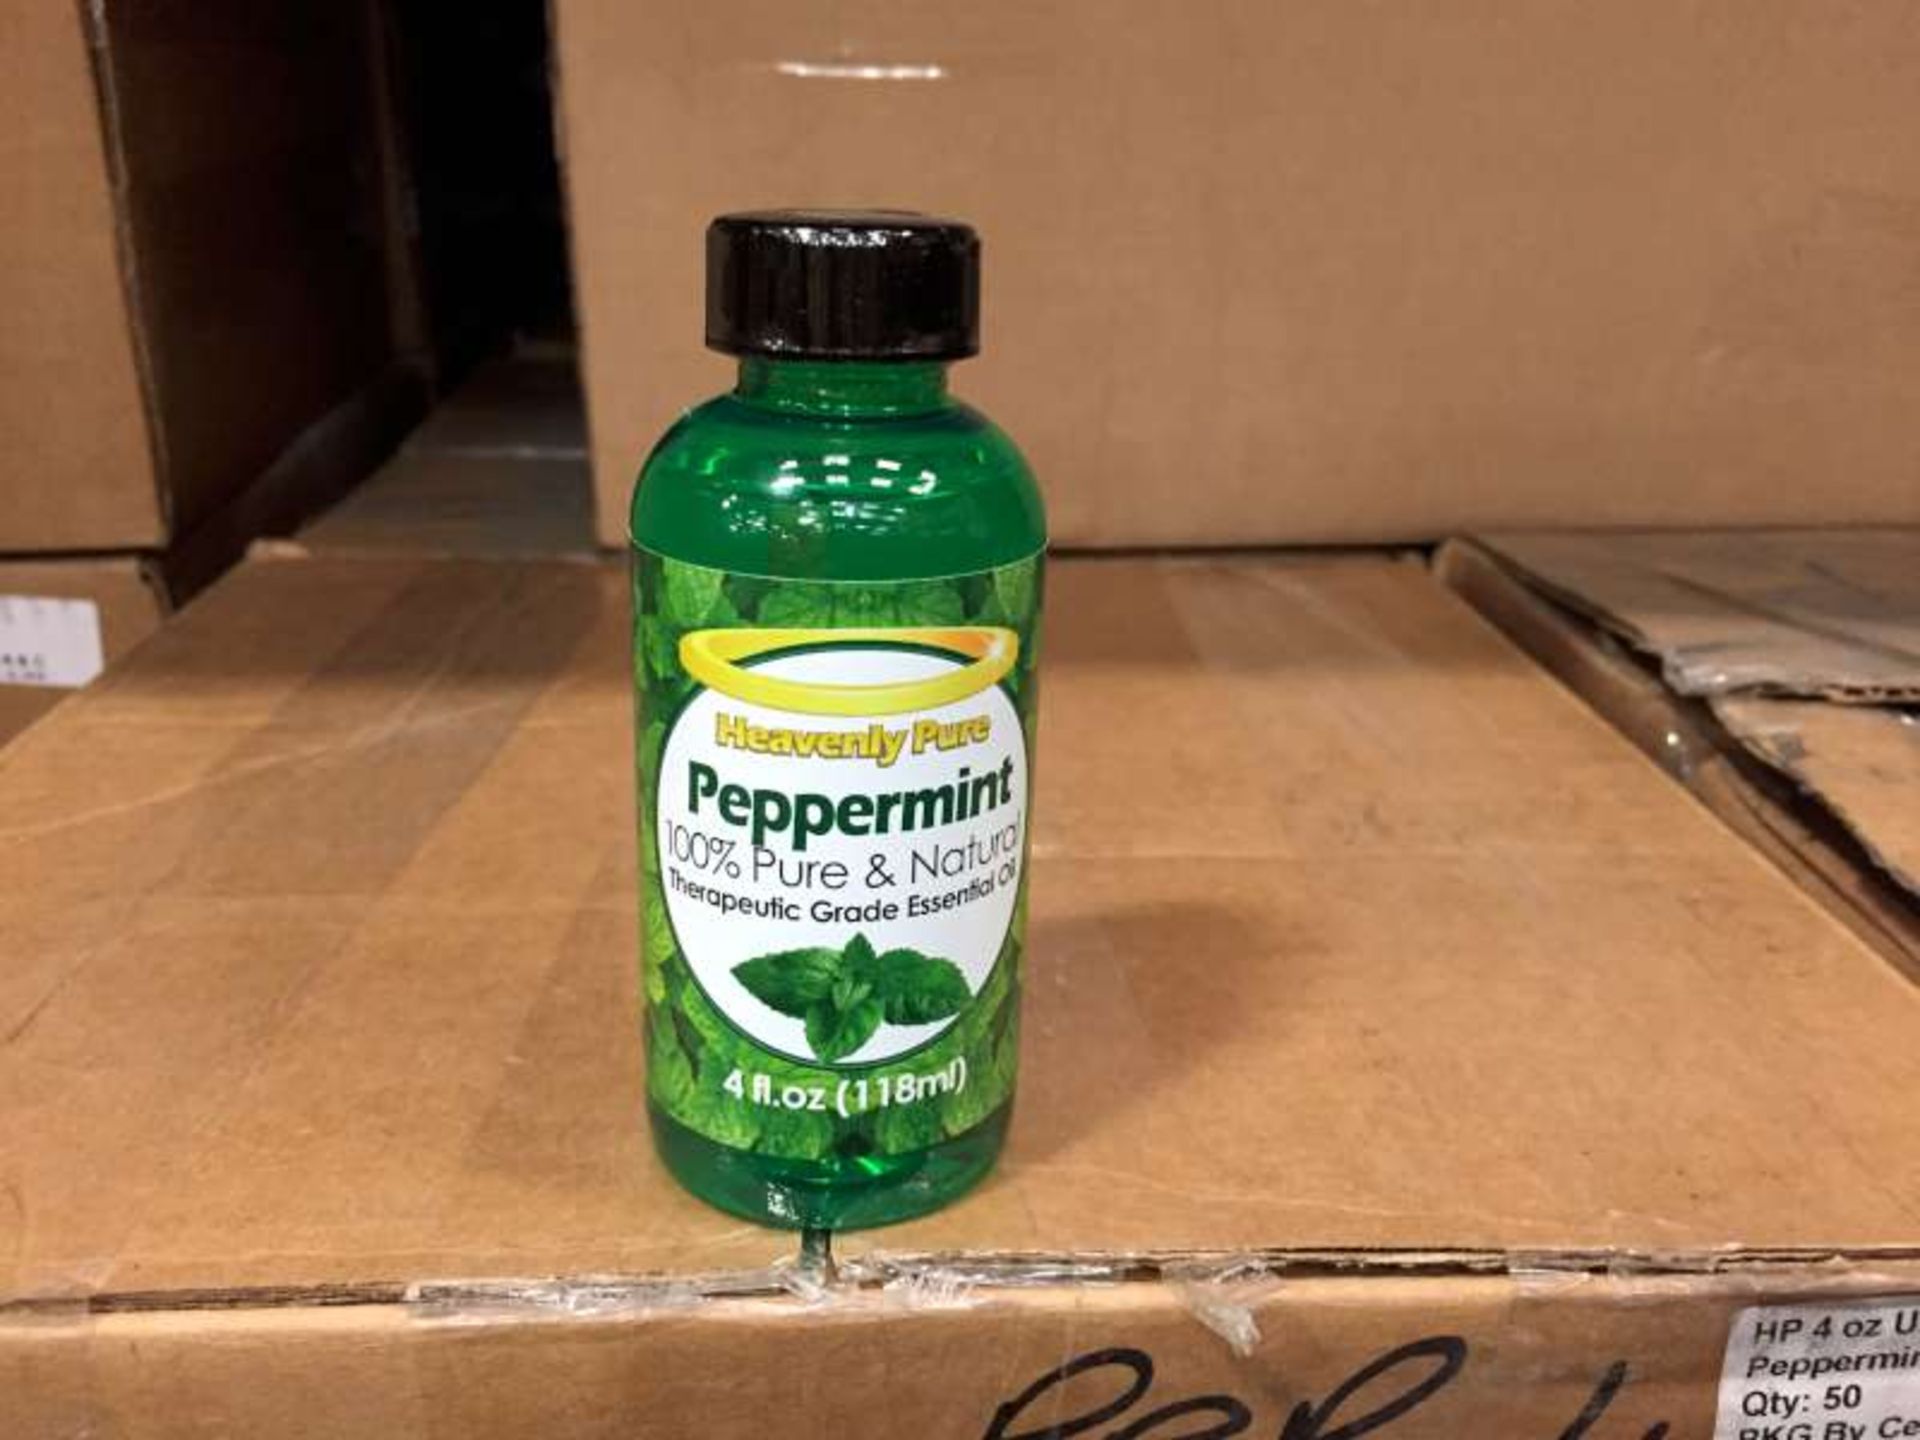 50 X 118 ML BOTTLES OF HEAVENLY PURE PEPPERMINT 100% PURE AND NATURAL THERAPEUTIC GRADE ESSENTIAL